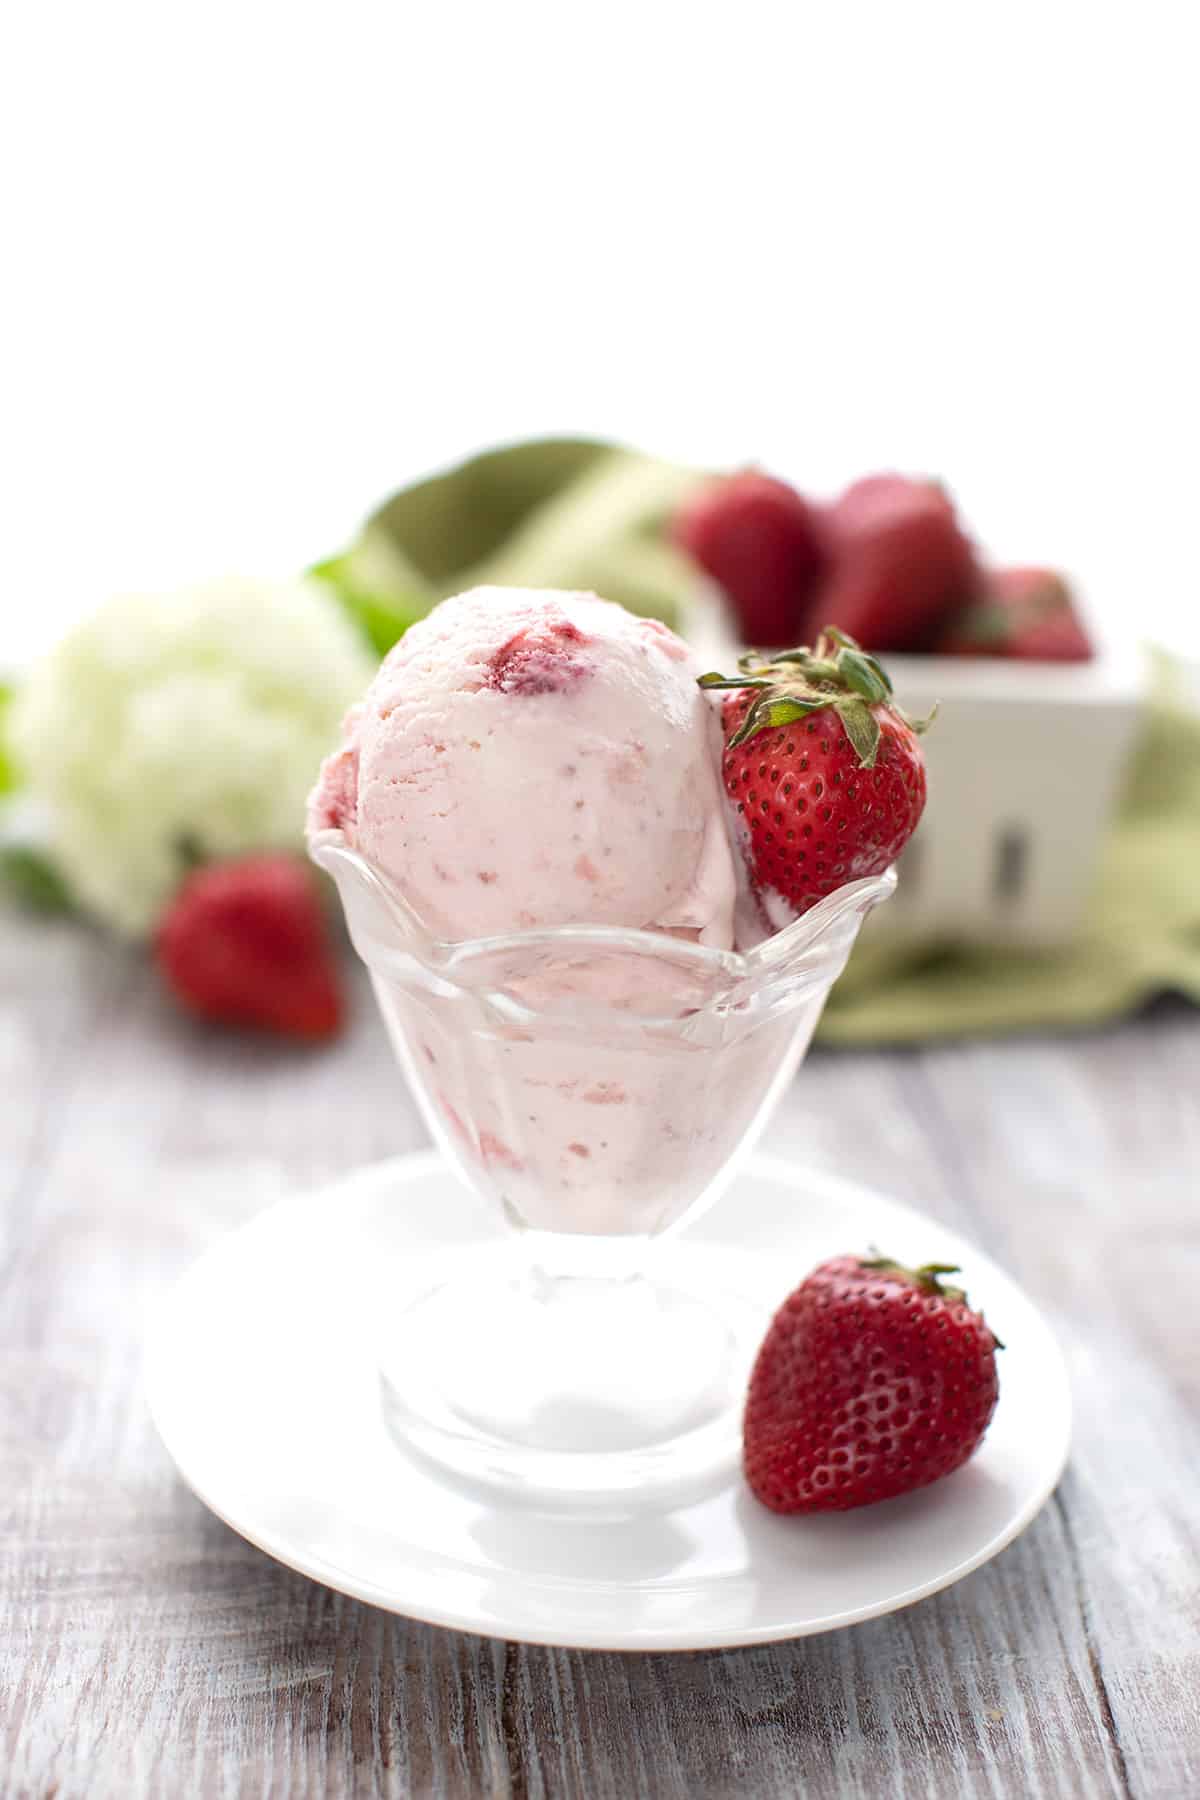 Keto strawberry ice cream in a glass ice cream cup with a fresh berry stuck in the side and another just below on the plate.